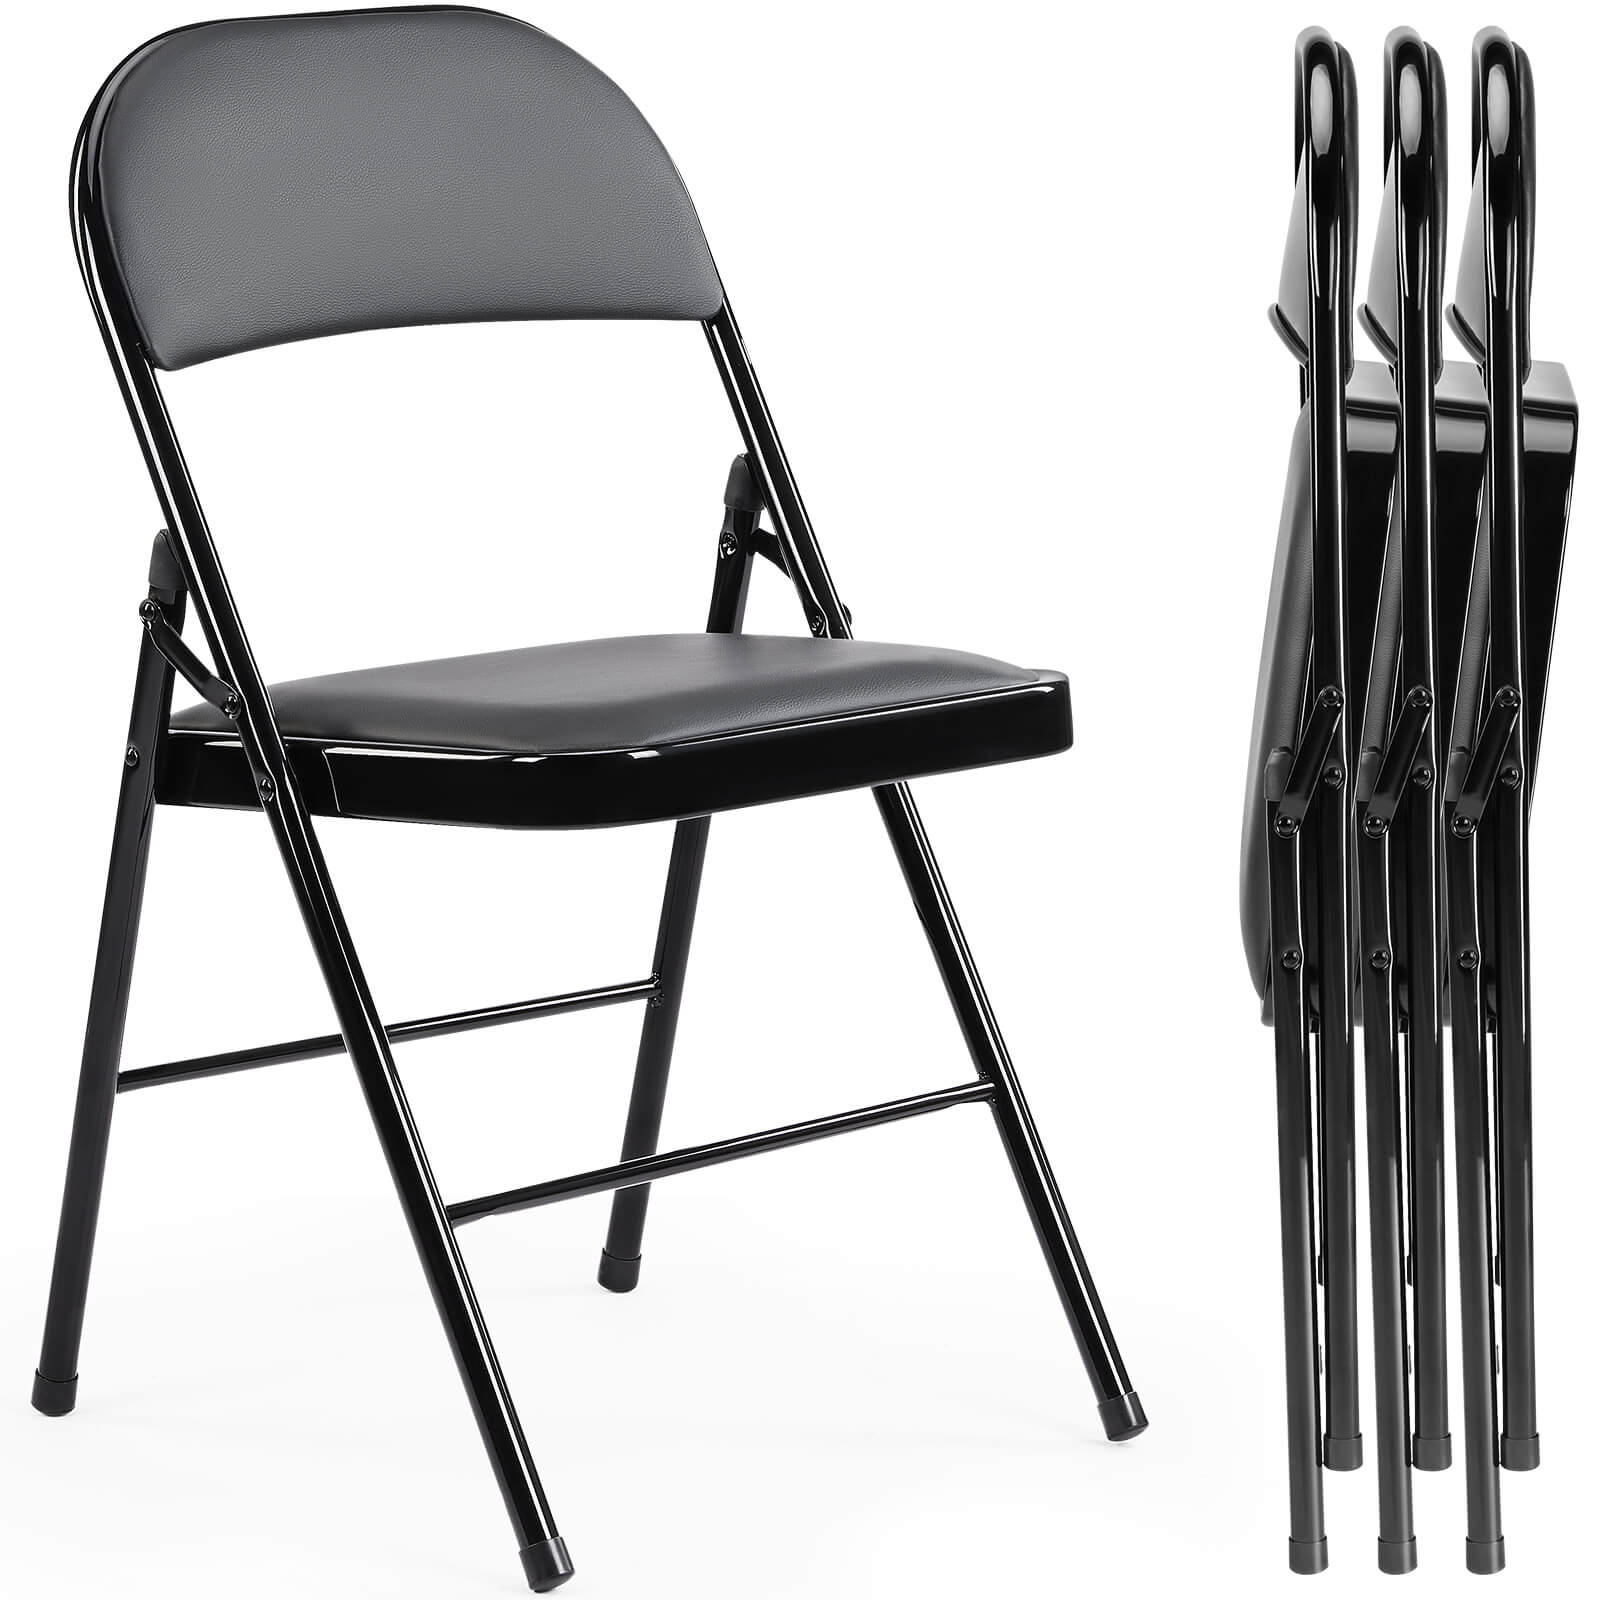 Genuine Leather Folding Chair - Soft and comfortable, easy to carry and store, suitable for events, weddings, parties, home, office